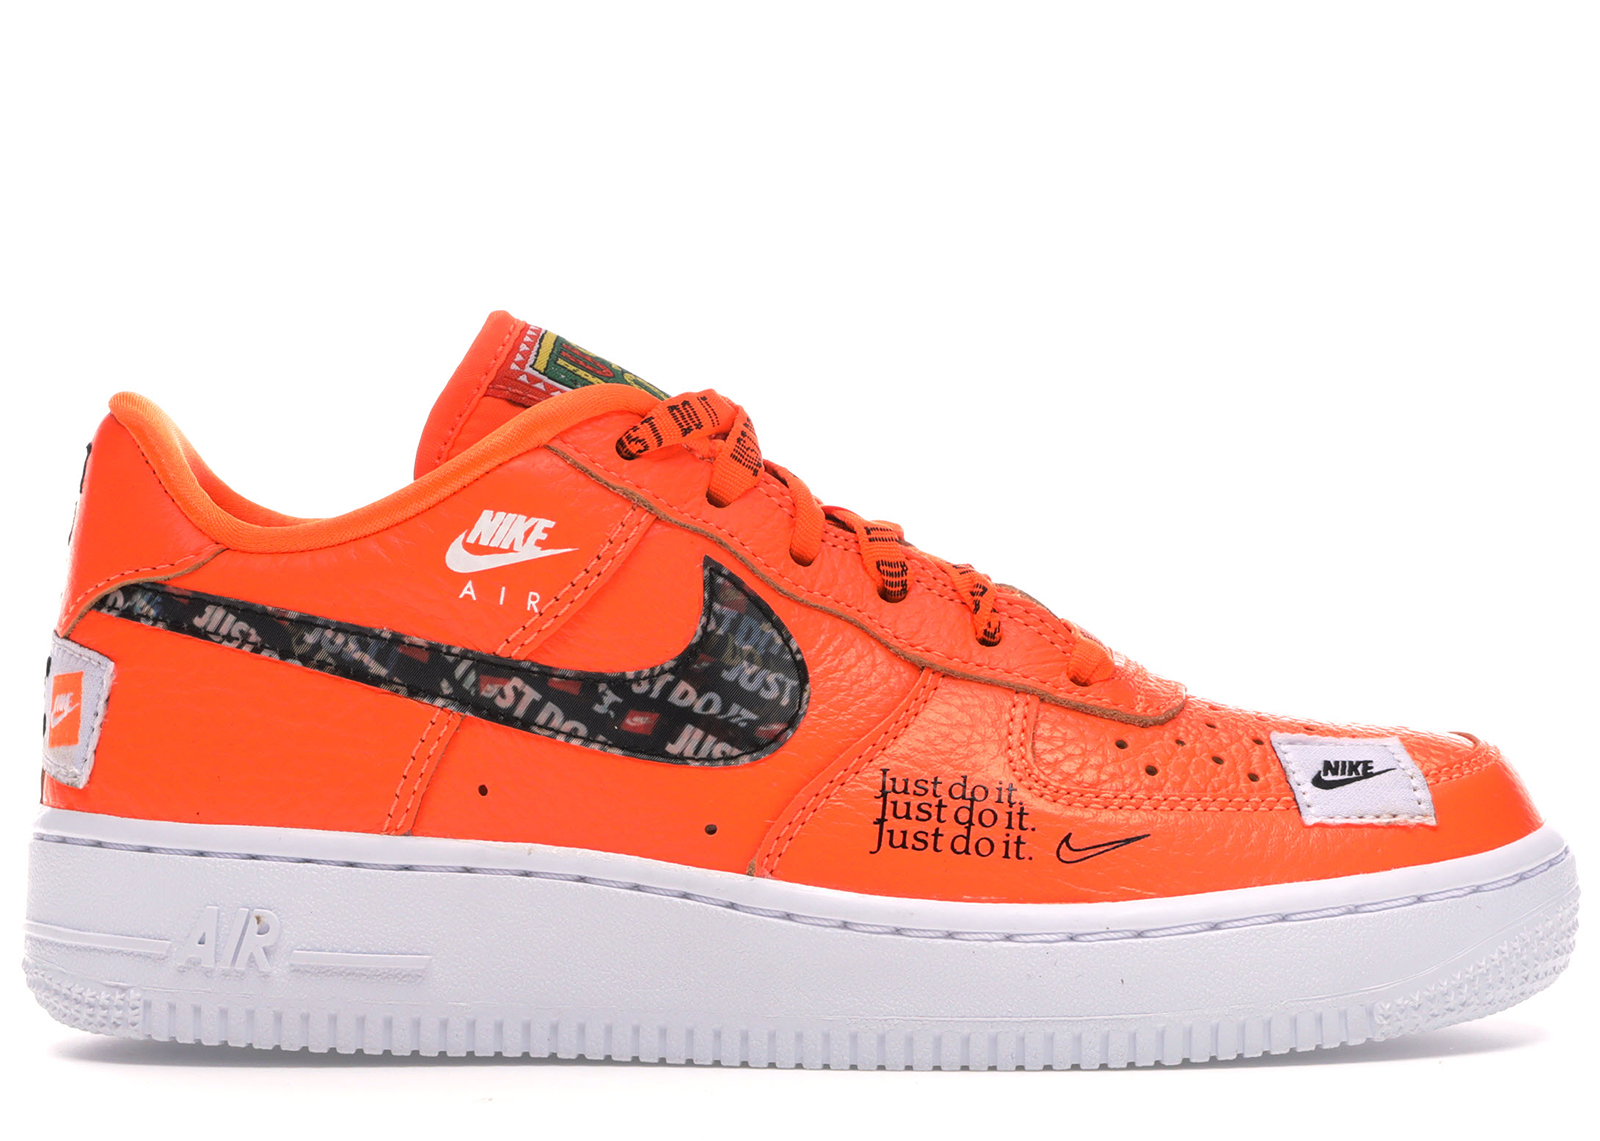 Nike Air Force 1 Low Just Do It Pack Orange (GS) - AO3977-800